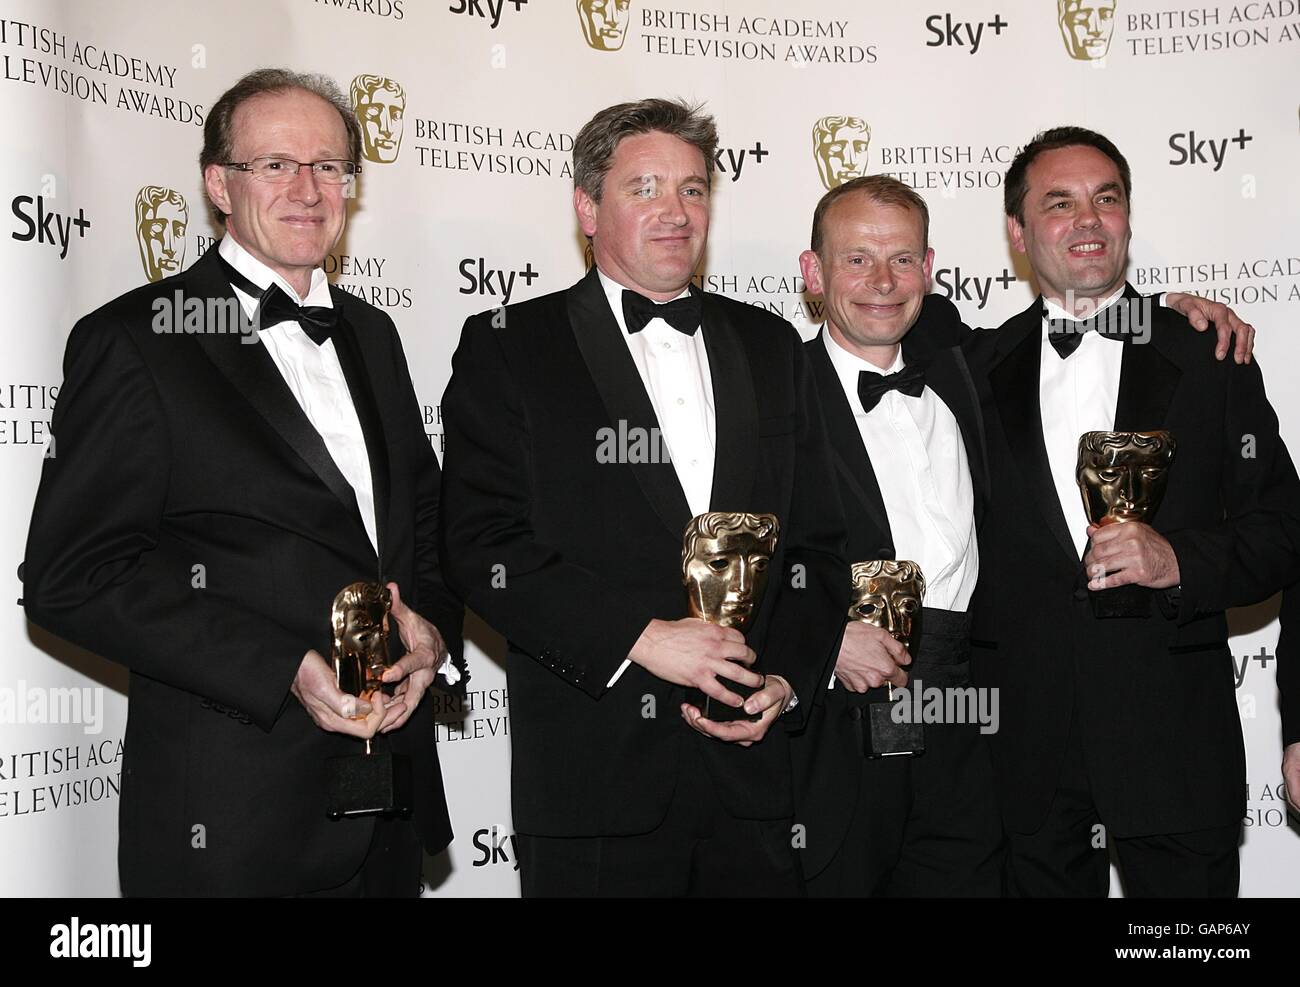 Chris Granlund, Tom Giles, Andrew Marr and Clive Edwards with the Specialist Factual award received for Andrew Marr's History of Modern Britain at the British Academy Television Awards at the London Palladium, W1. PUBLICATION OF THIS IMAGE AND WINNER RESULTS, IN WHATEVER MEDIUM, WHETHER PRINT, BROADCAST OR ONLINE IS UNDER STRICT EMBARGO TIL 2100 GMT SUNDAY 20 APRIL 2008. Stock Photo